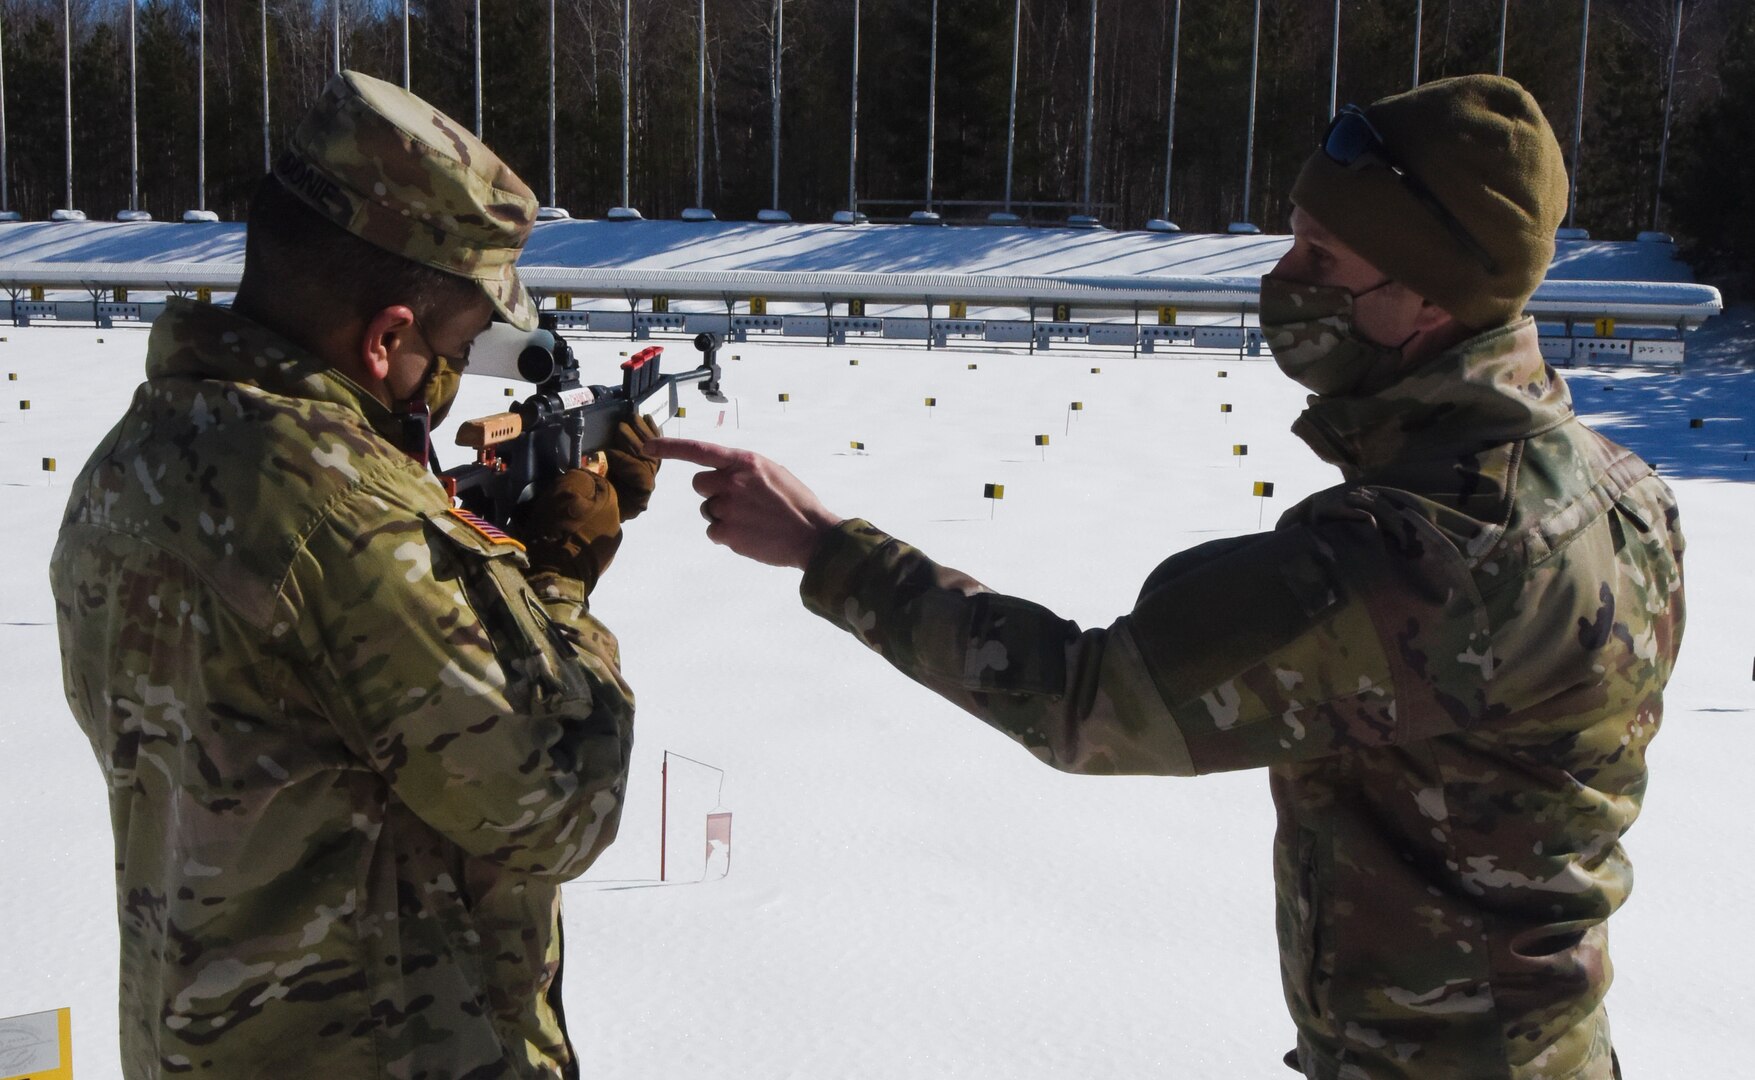 Air Force Tech. Sgt. Travis Voyer, right, familiarizes Maj. Gen. John Andonie on an Anschutz 1807 rifle used in biathlons at the Camp Ethan Allen Training Site in Jericho, Vermont, Feb. 26, 2021. Four Soldiers with the Vermont Army National Guard were sent to Austria in 2020 to represent the United States in the Biathlon Pre-World Cup. Voyer is a biathlon trainer with the 158th Logistics Readiness Squadron. Andonie is the deputy director of the Army National Guard. (U.S. Army National Guard photo by Marcus Tracy)